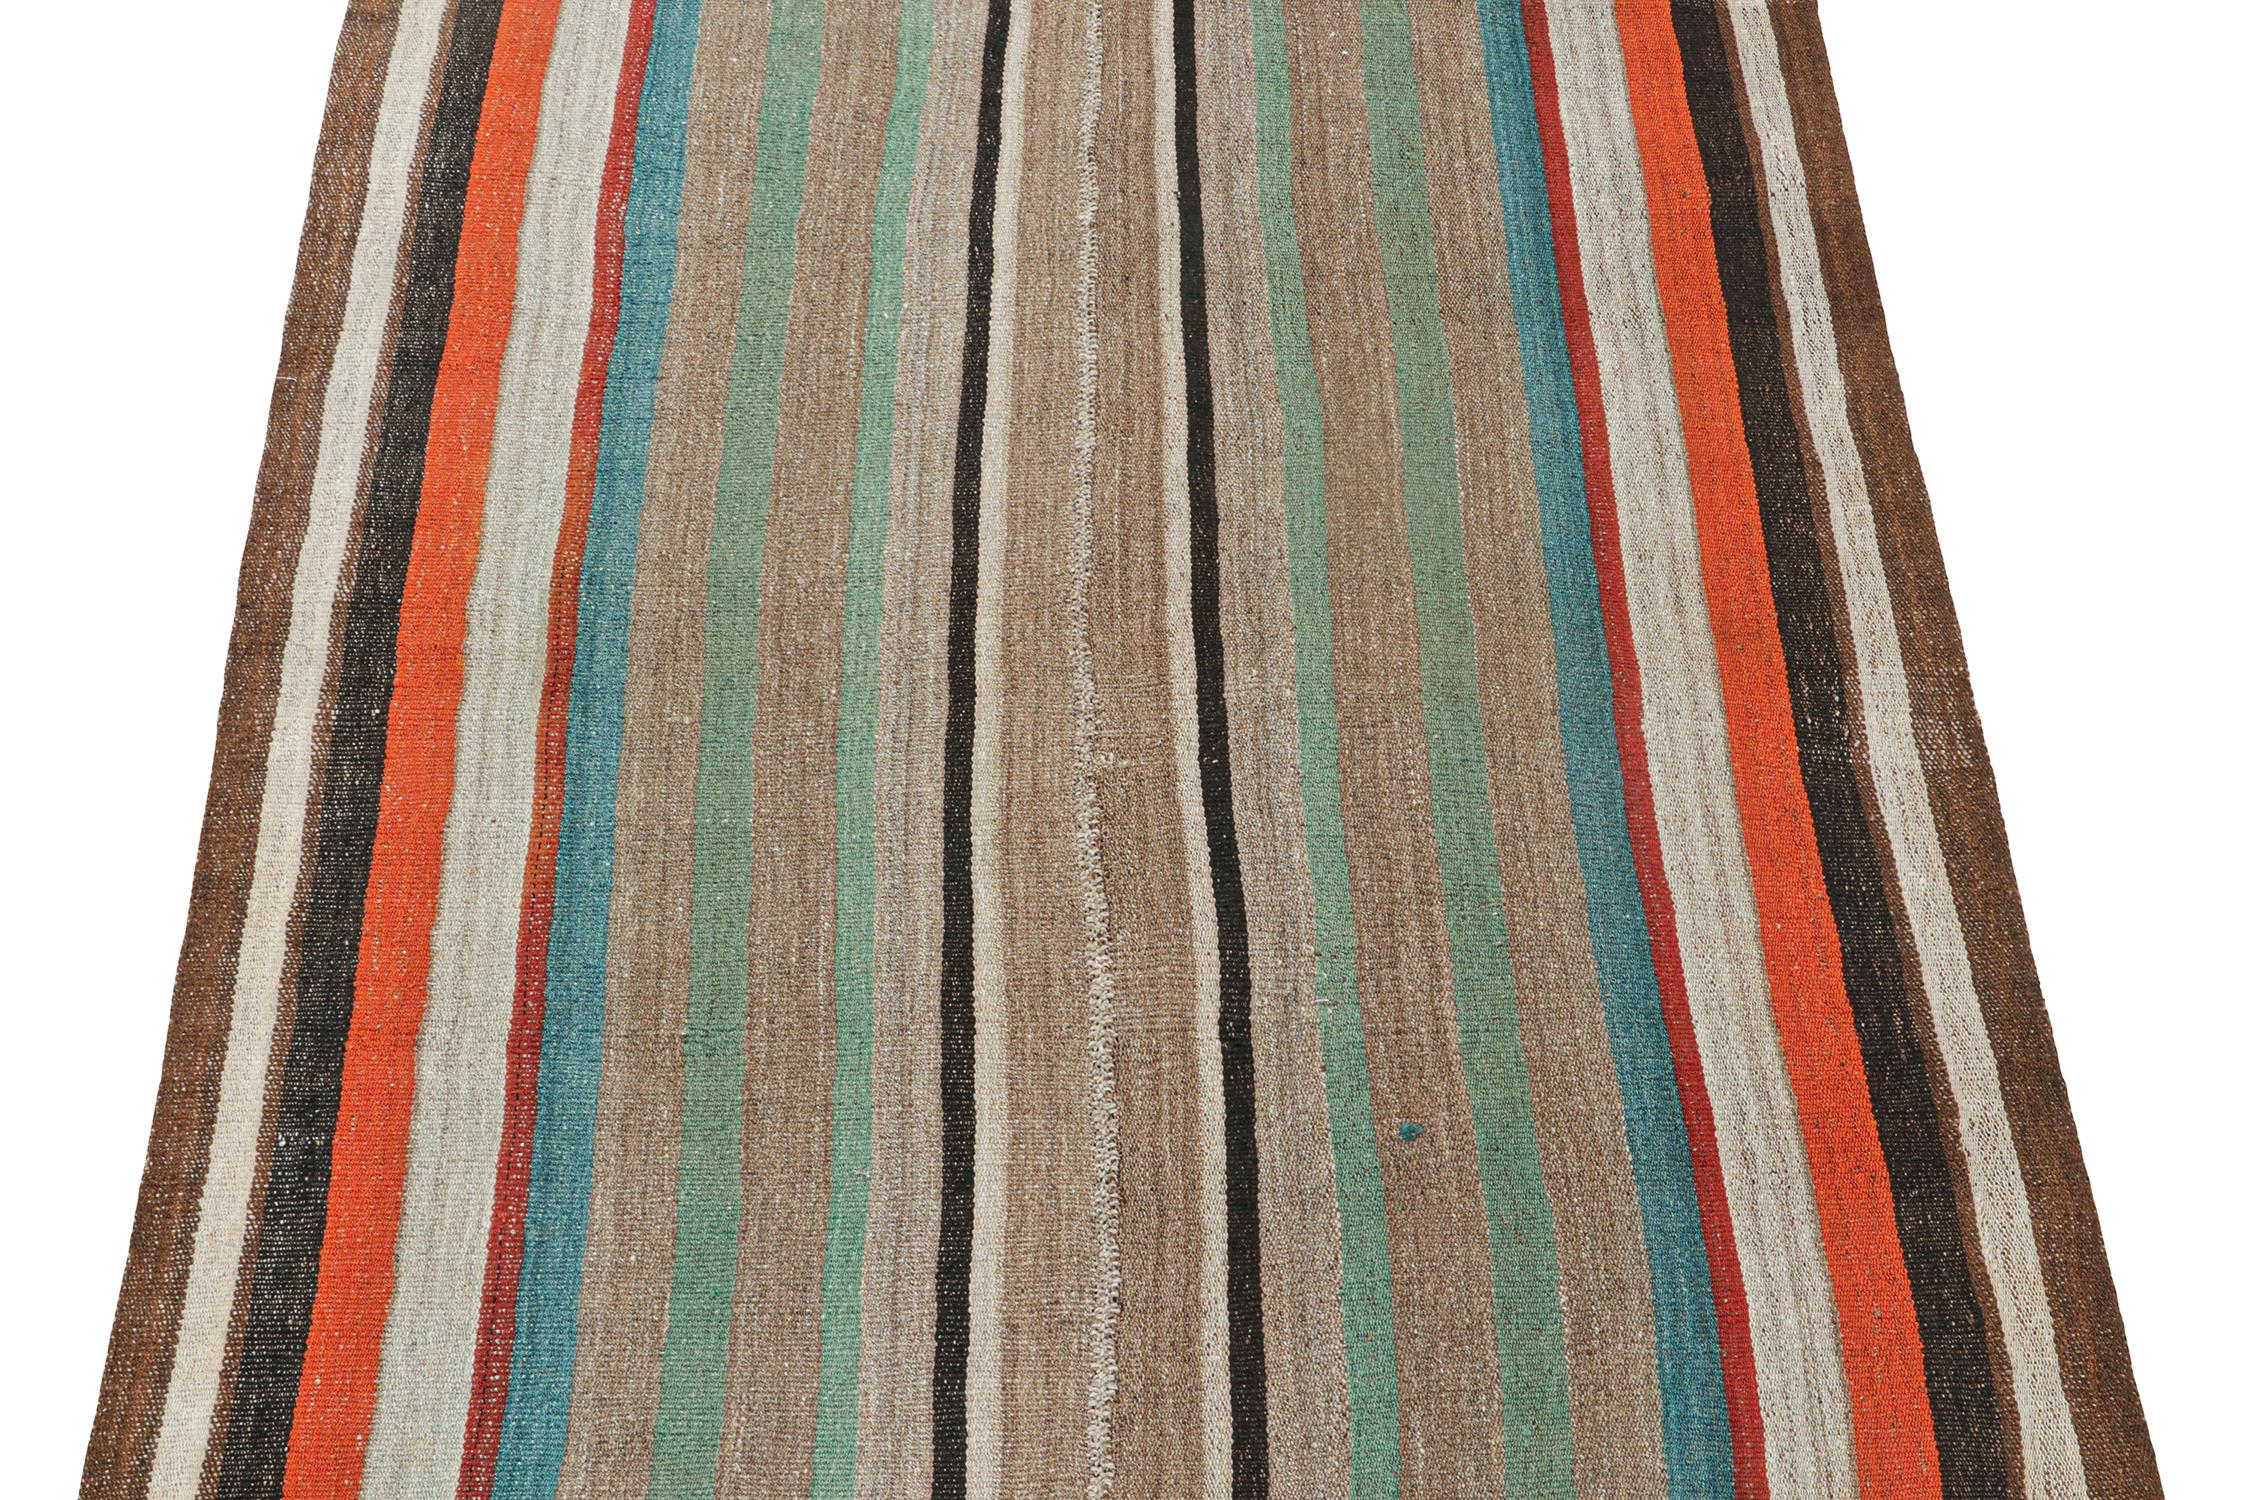 This vintage 6x7 Persian Kilim is a rare midcentury tribal rug, handwoven in wool circa 1950-1960. 

Its design most likely represents a Jajim-style Kilim–a flat-weaving technique in which multiple pieces are combined into one. This creates the